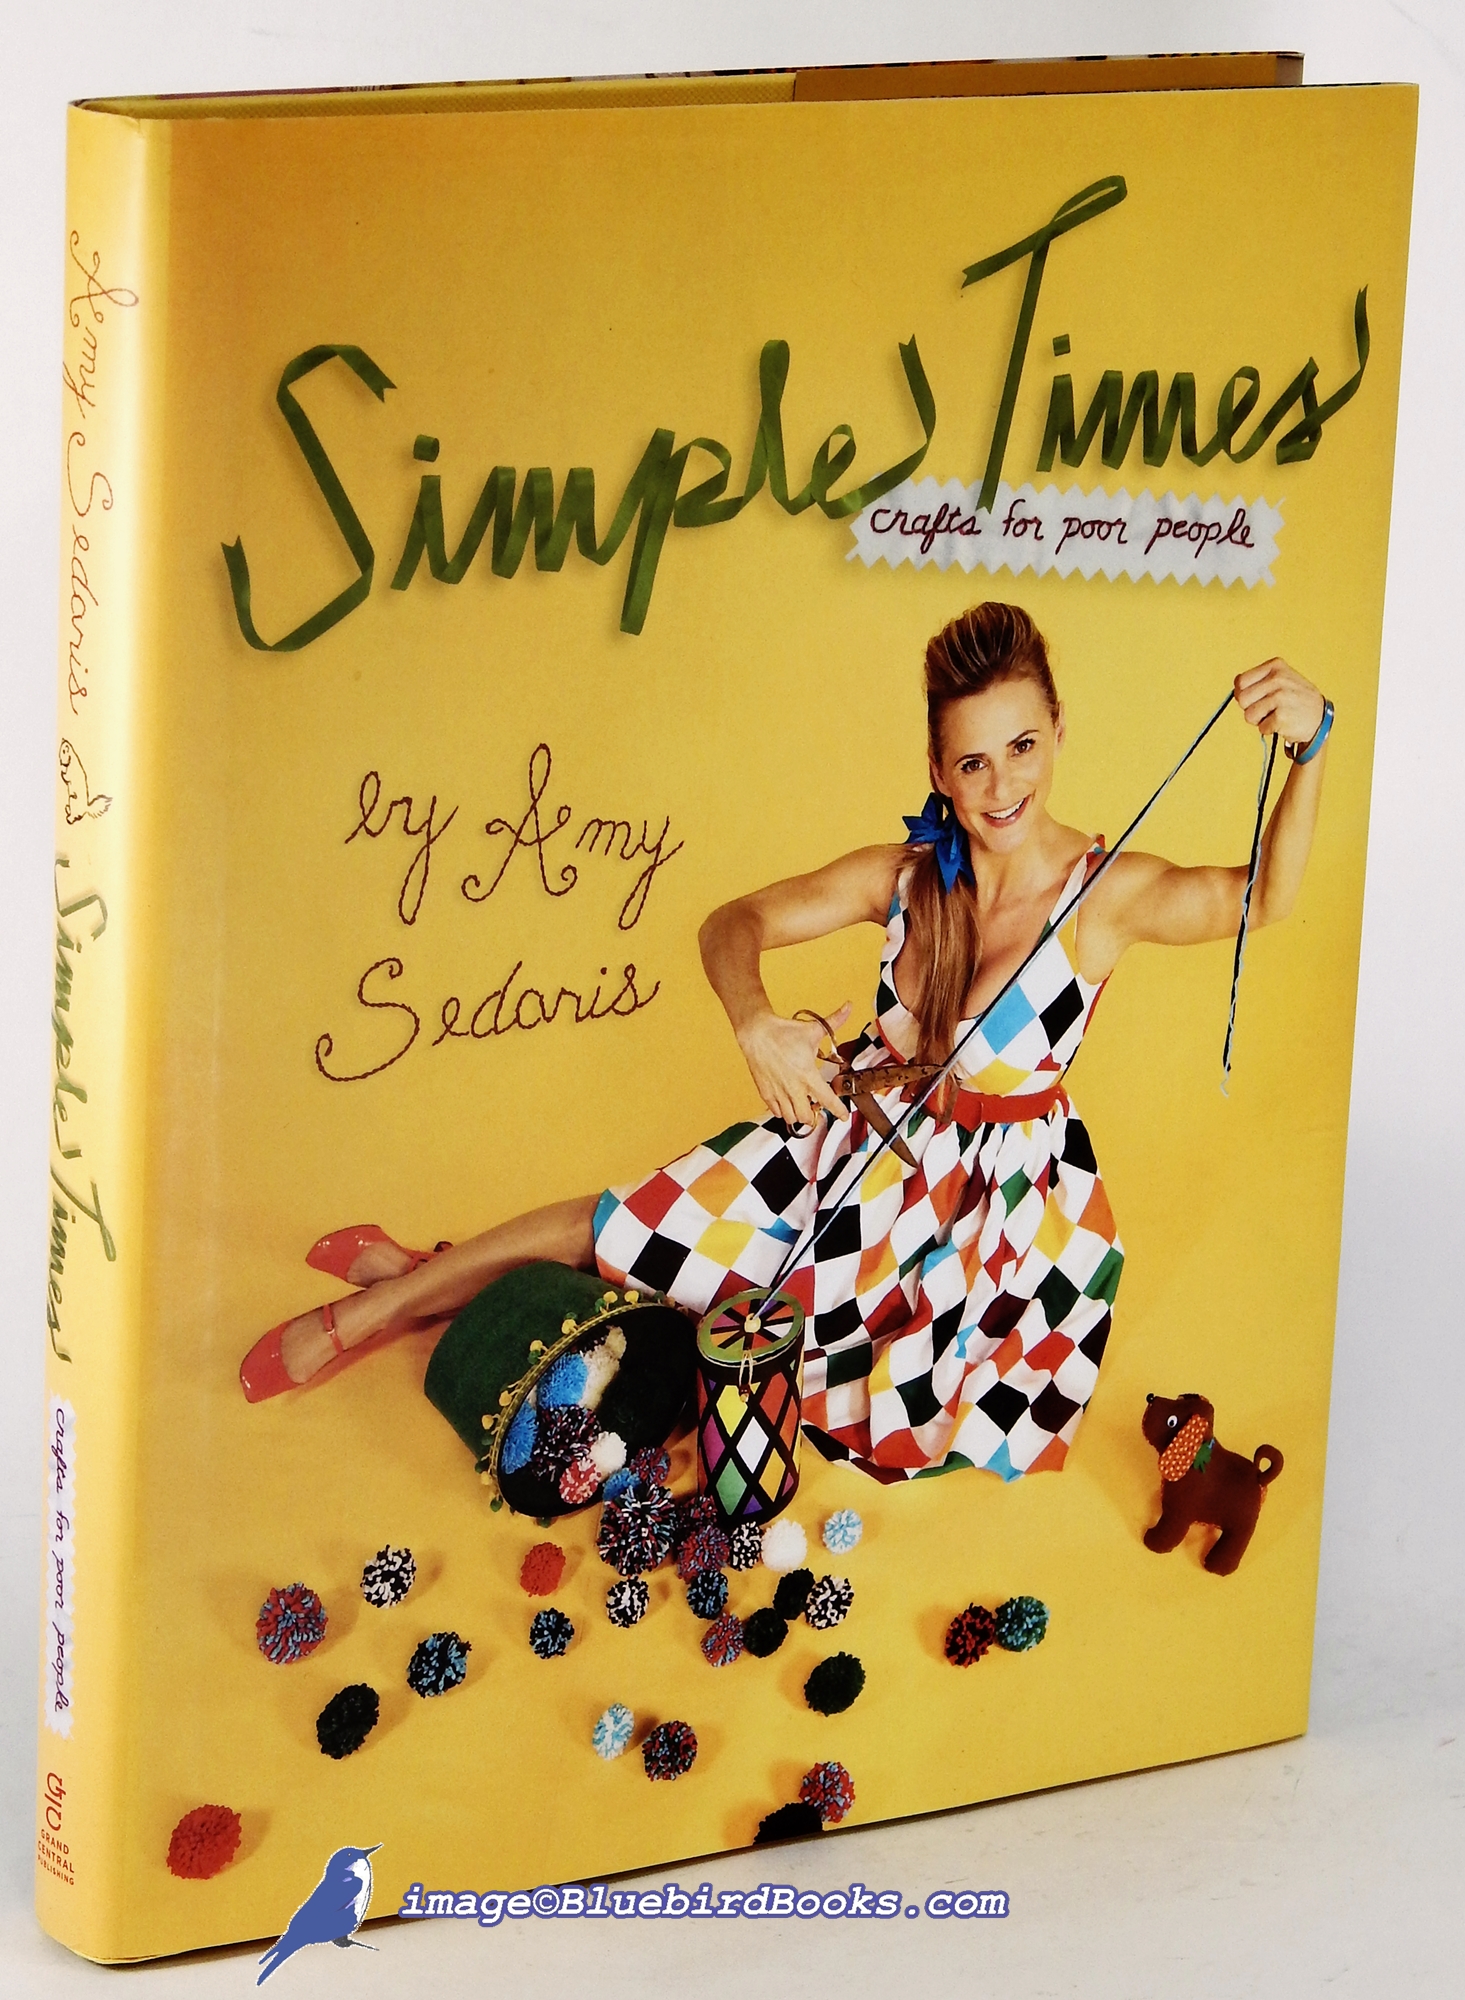 SEDARIS, AMY; DINELLO, PAUL - Simple Times: Crafts for Poor People